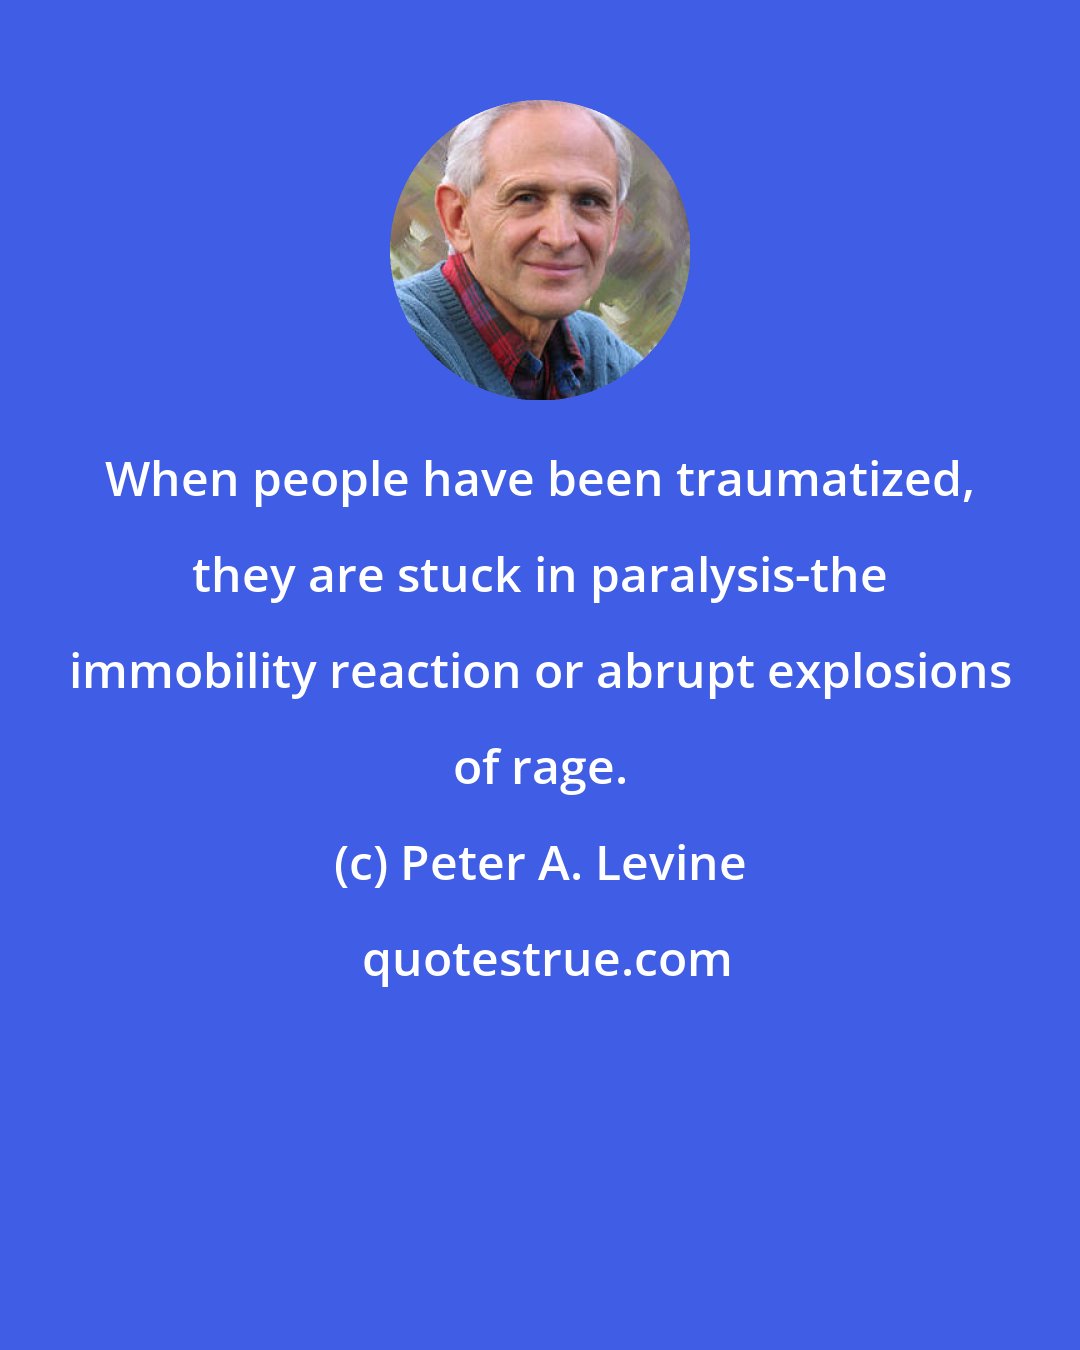 Peter A. Levine: When people have been traumatized, they are stuck in paralysis-the immobility reaction or abrupt explosions of rage.